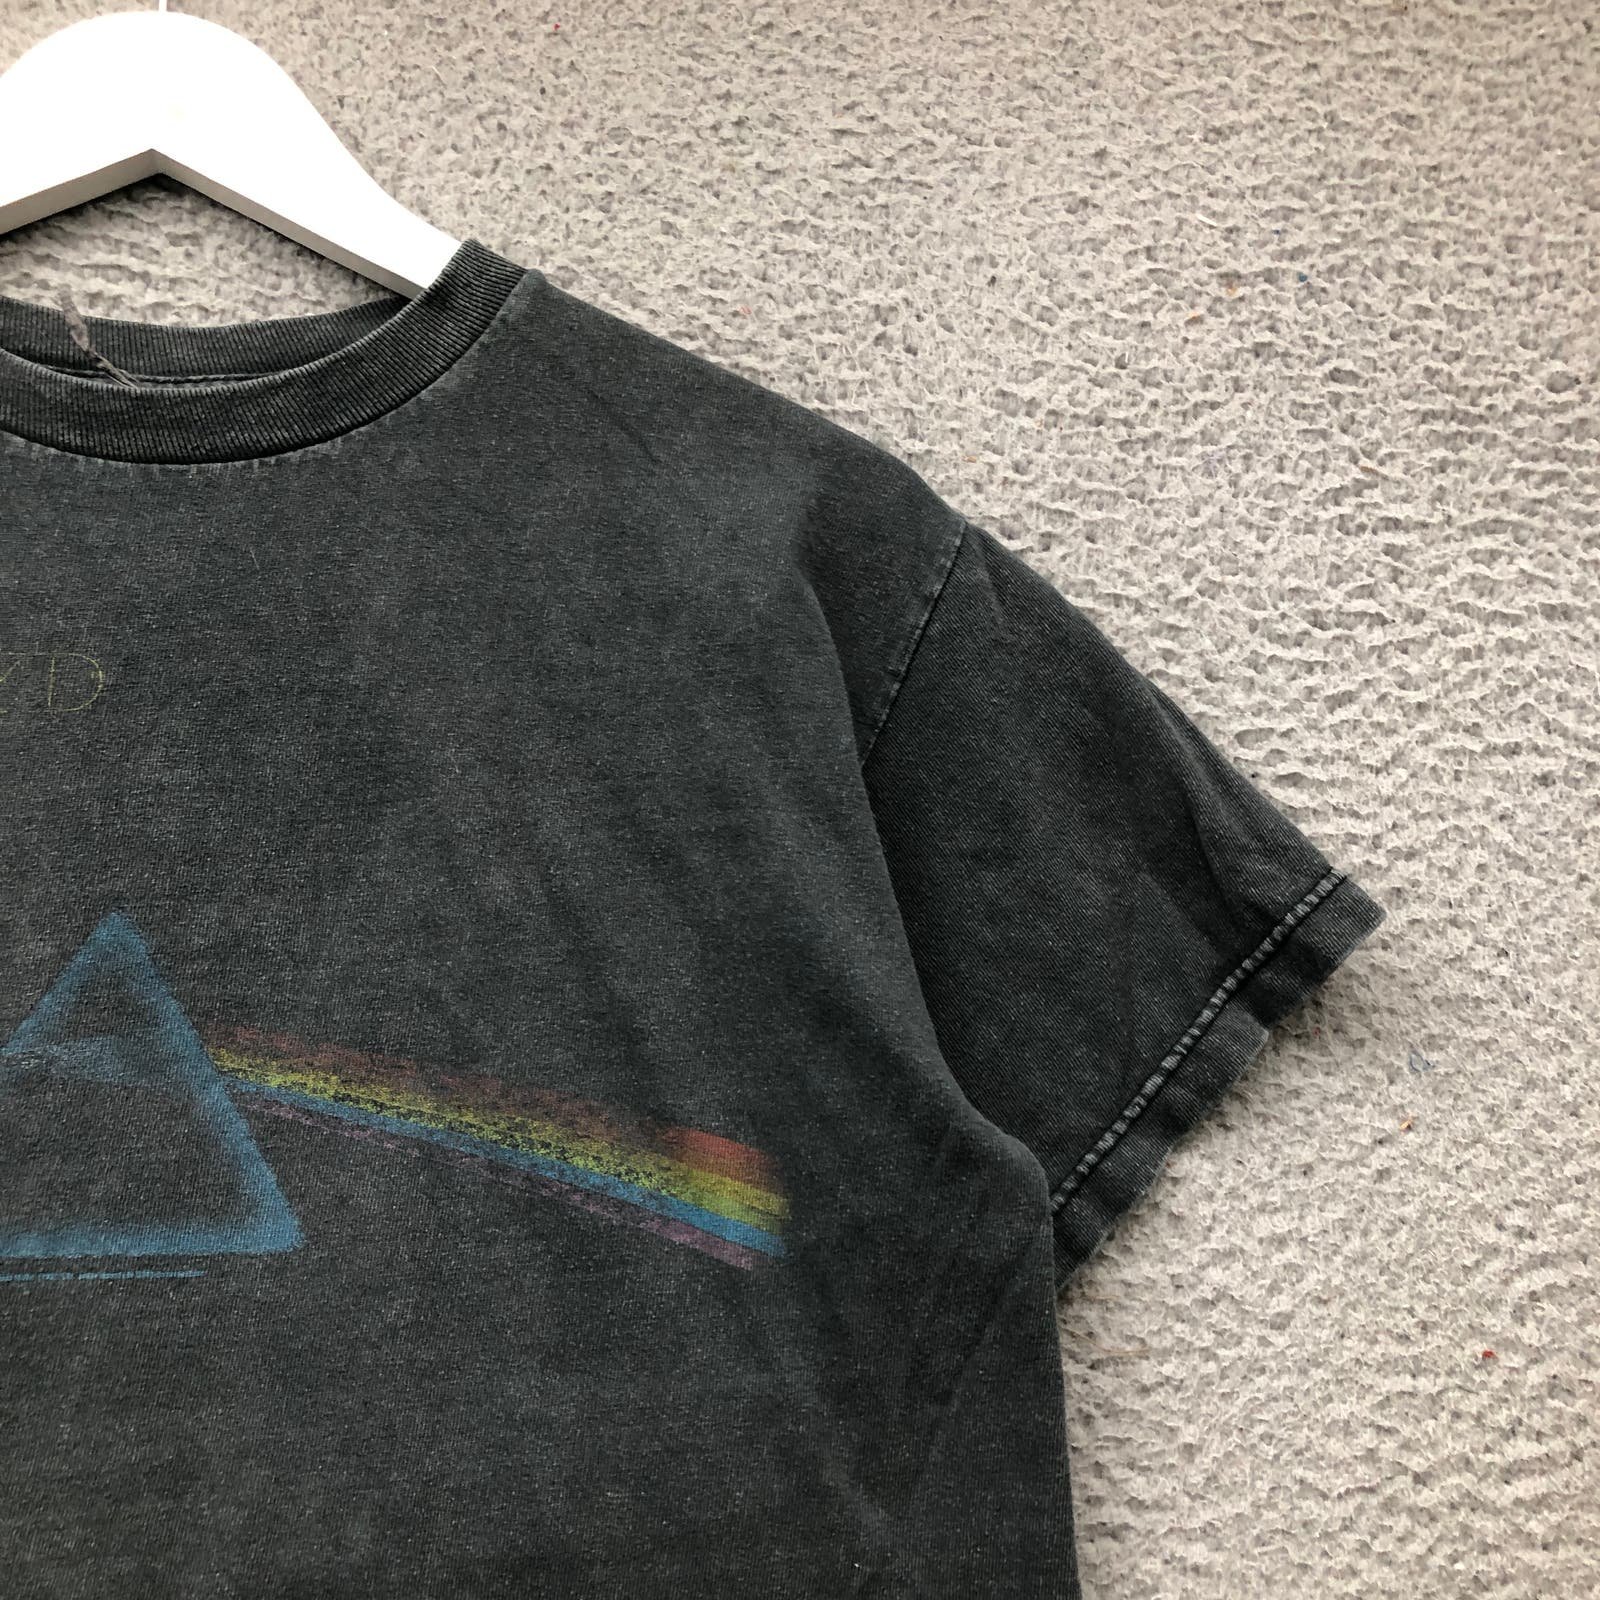 Beautiful Pink Floyd The Dark Side Of The Moon US Tour 1973 Cropped T-Shirt Women´s M Gray jTf63kXJq New Style